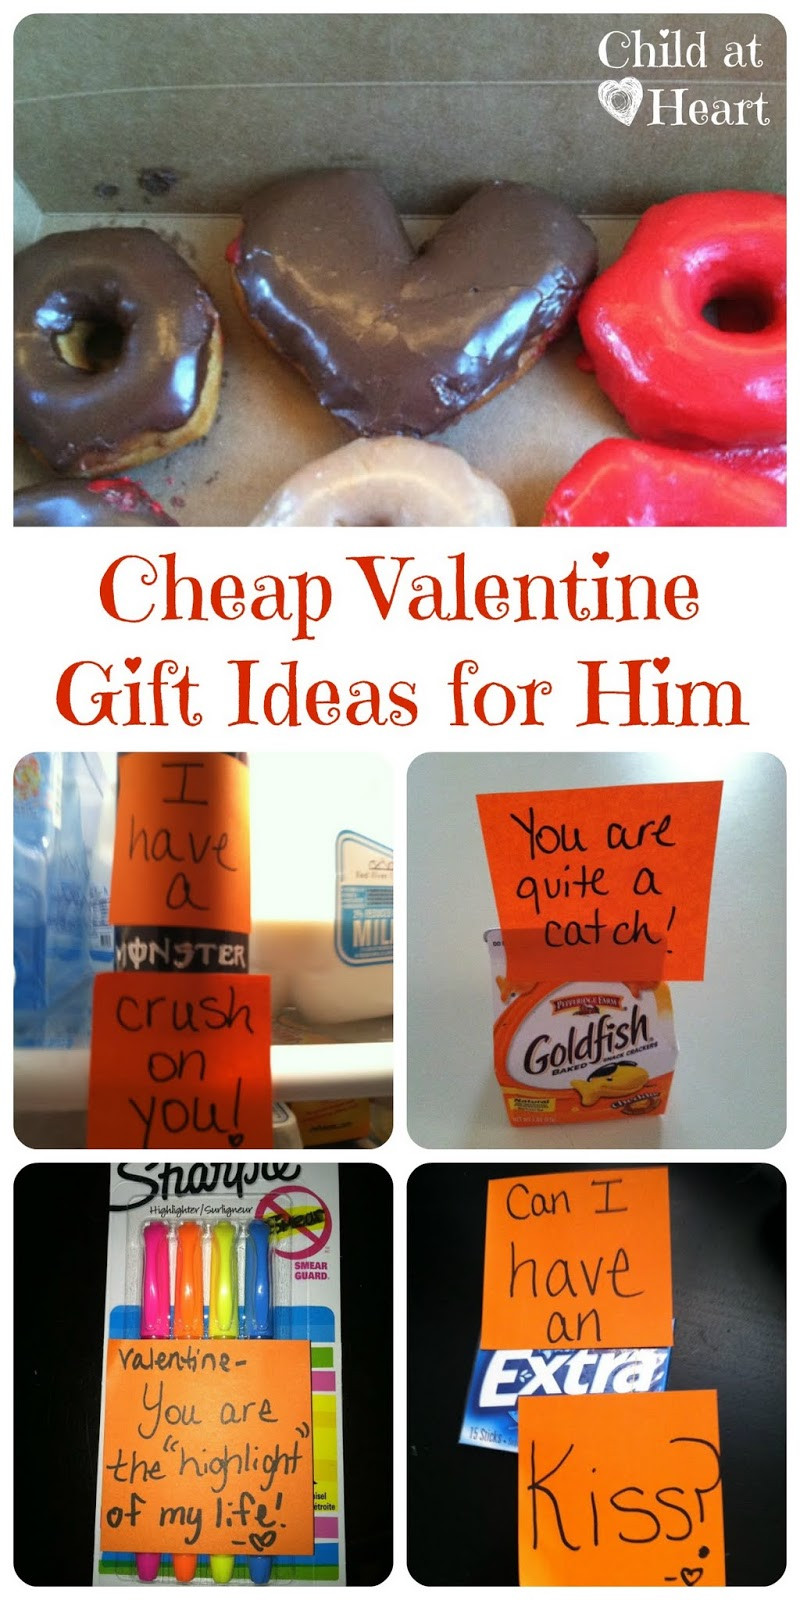 Gift Ideas Valentines Day Him
 Cheap Valentine Gift Ideas for Him Child at Heart Blog